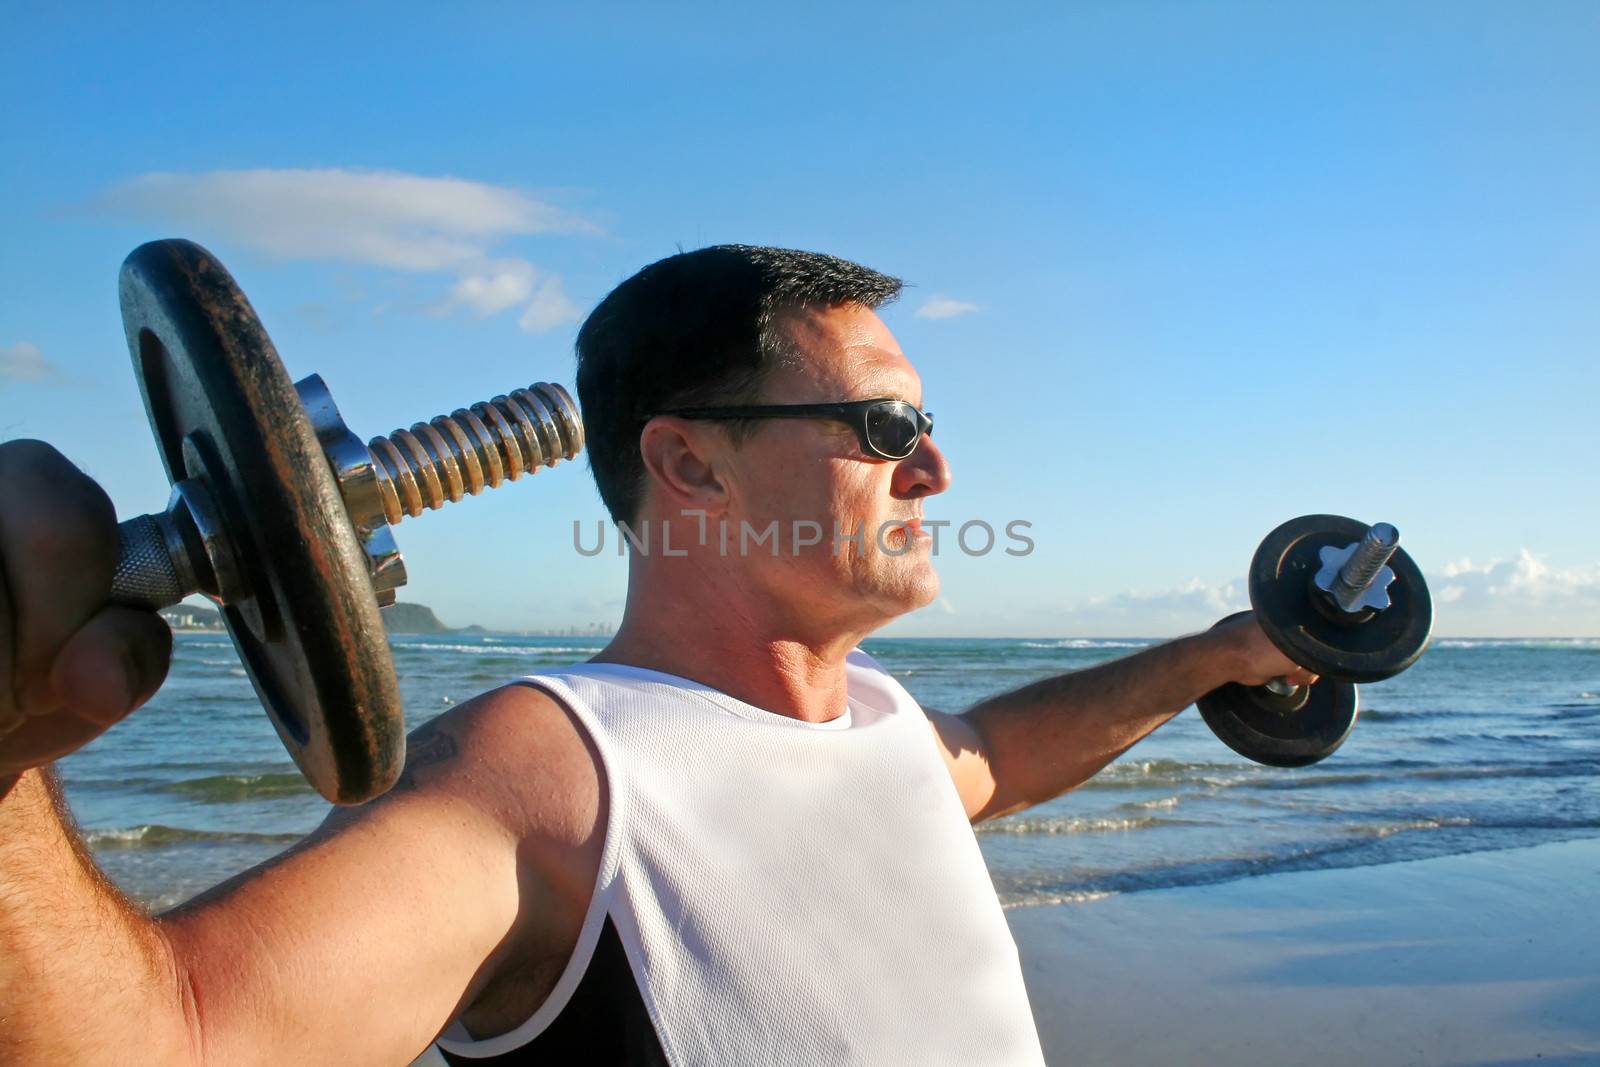 Man works out with weights on the beach just after sunrise.